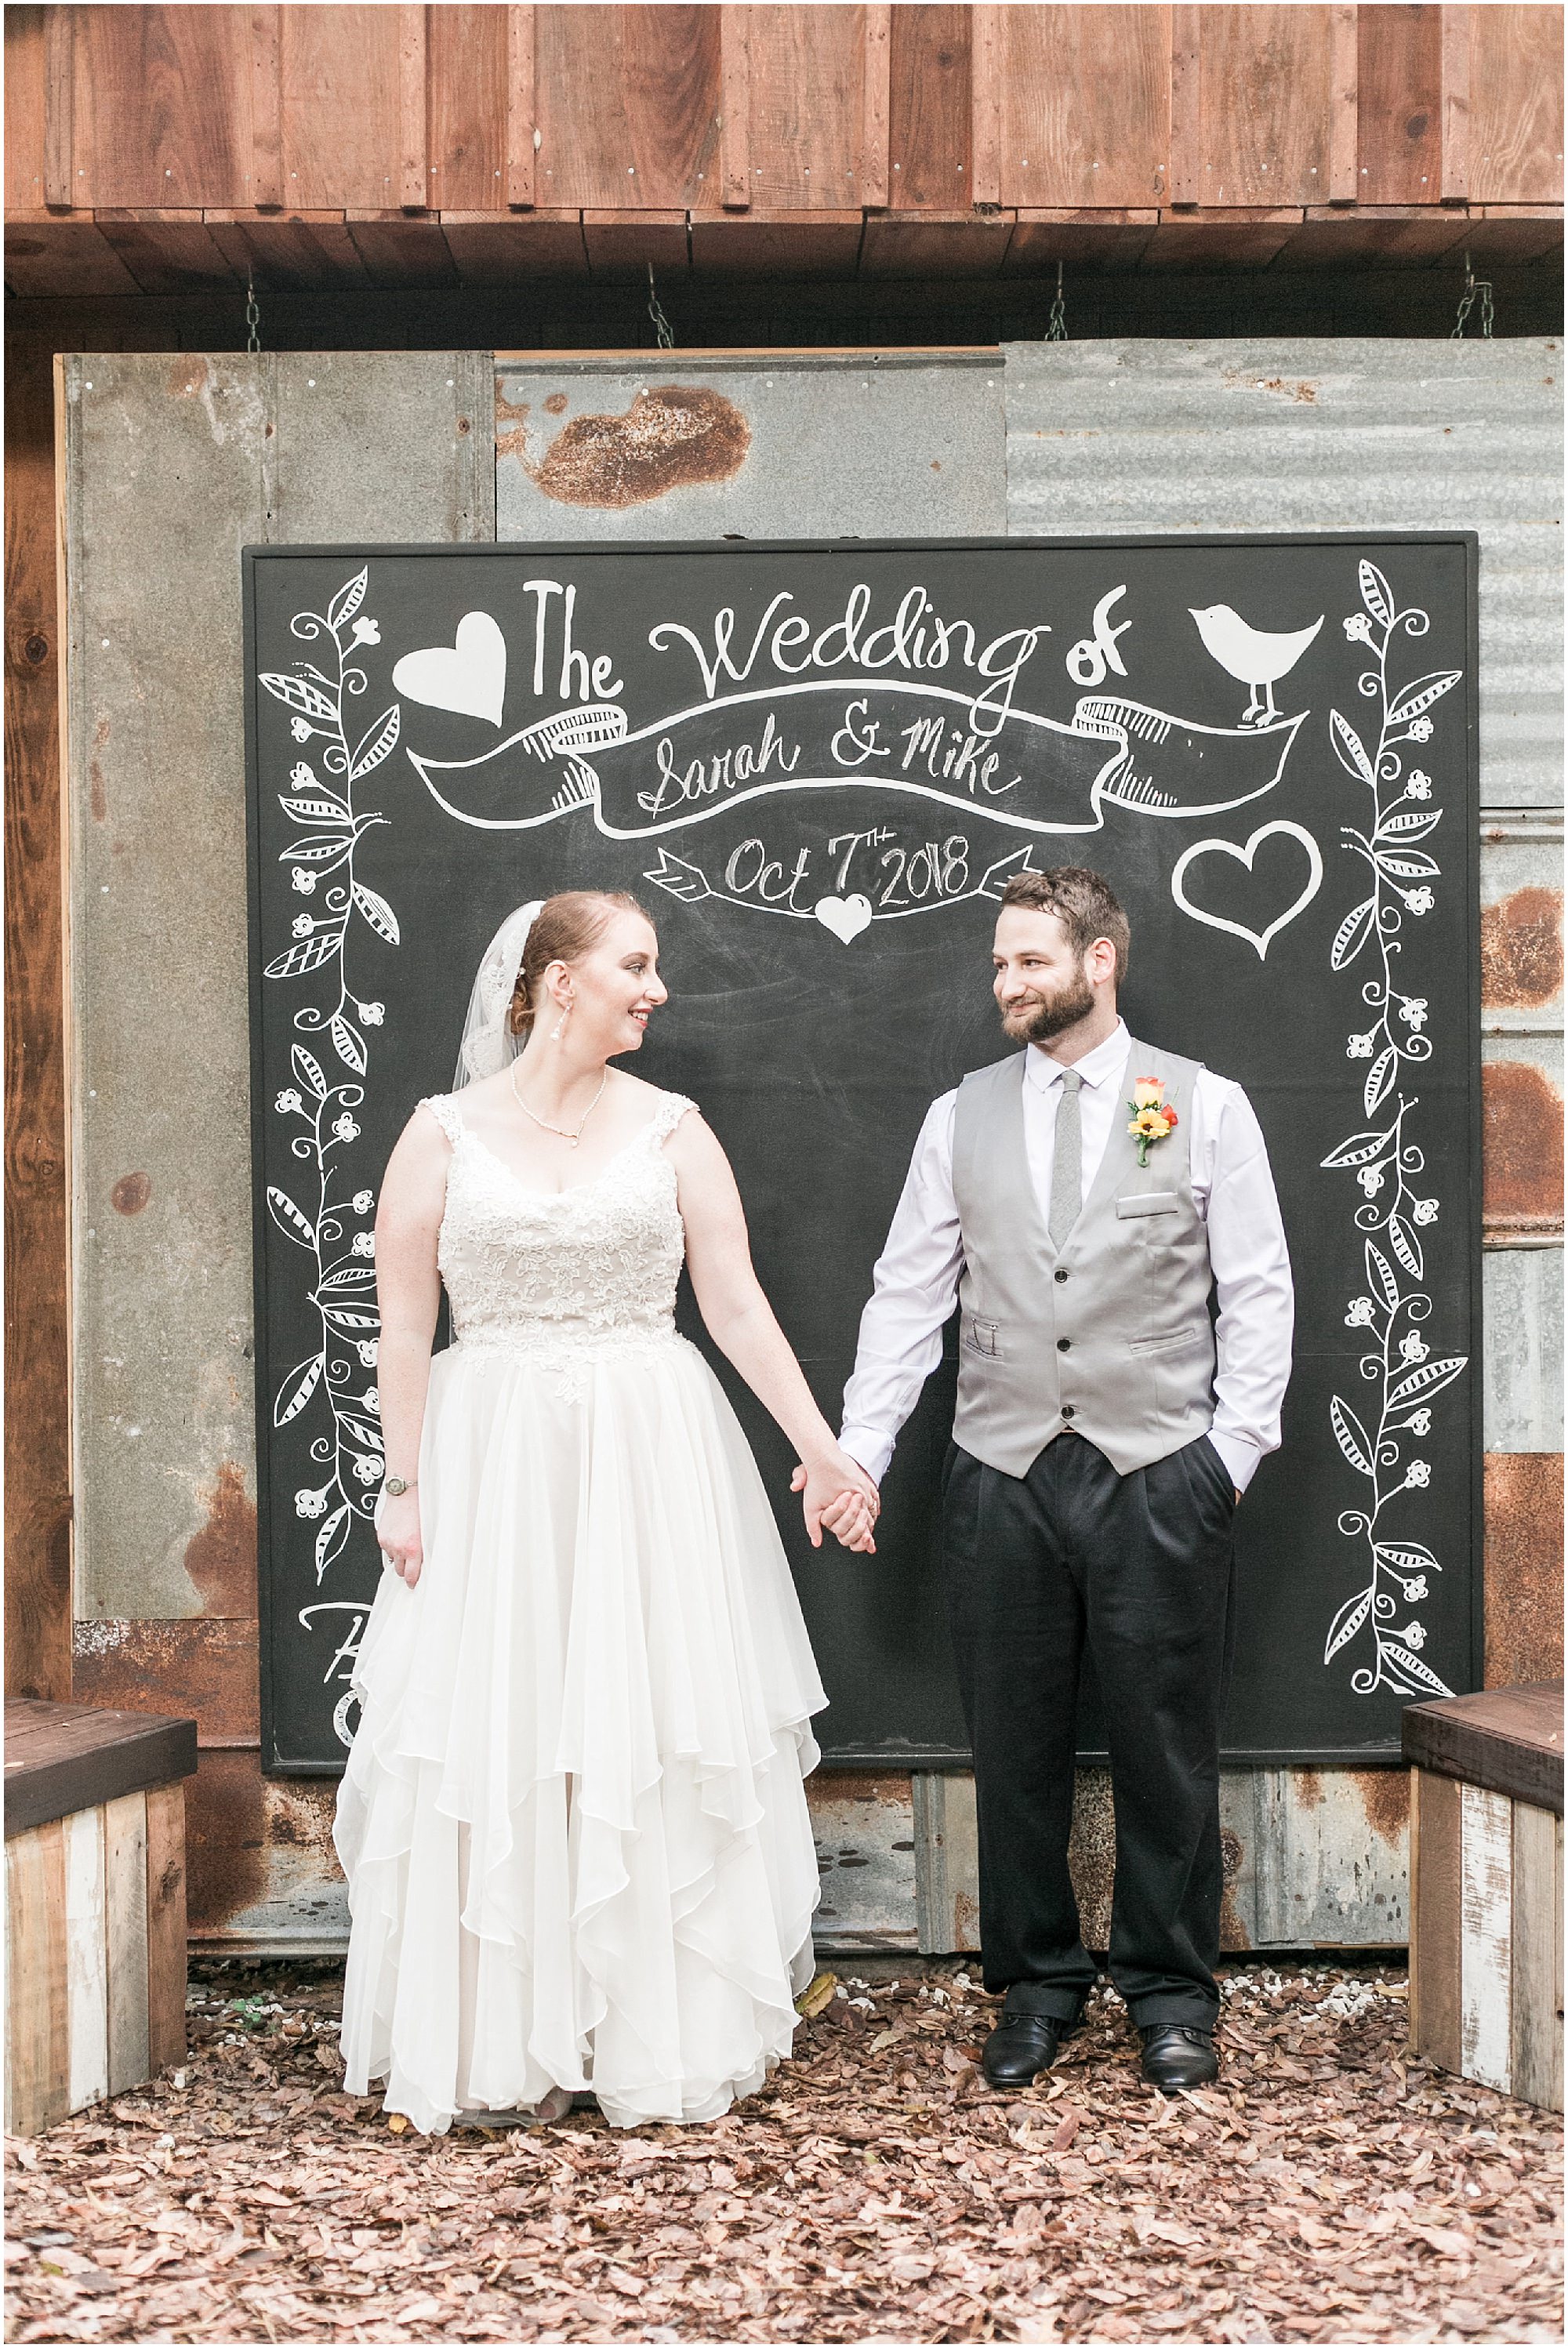 Bride and groom taking a photo in front of a chalkboard 